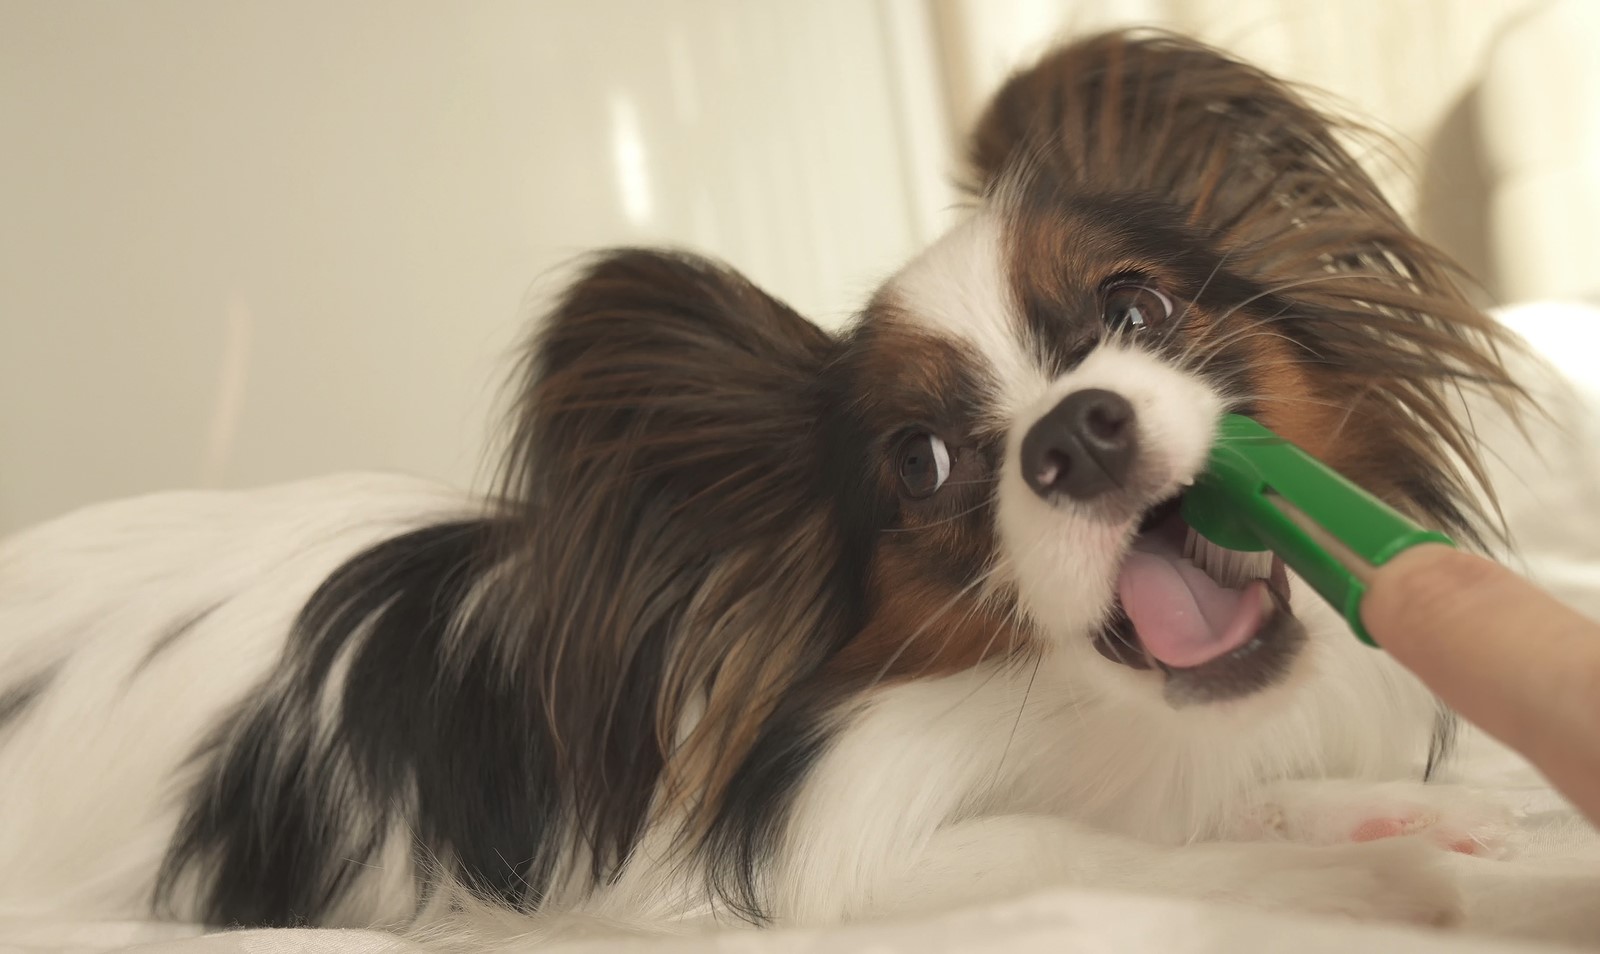 Dog Dental Care: Why Dogs Need The Dentist & How To Clean Your Dog’s Teeth